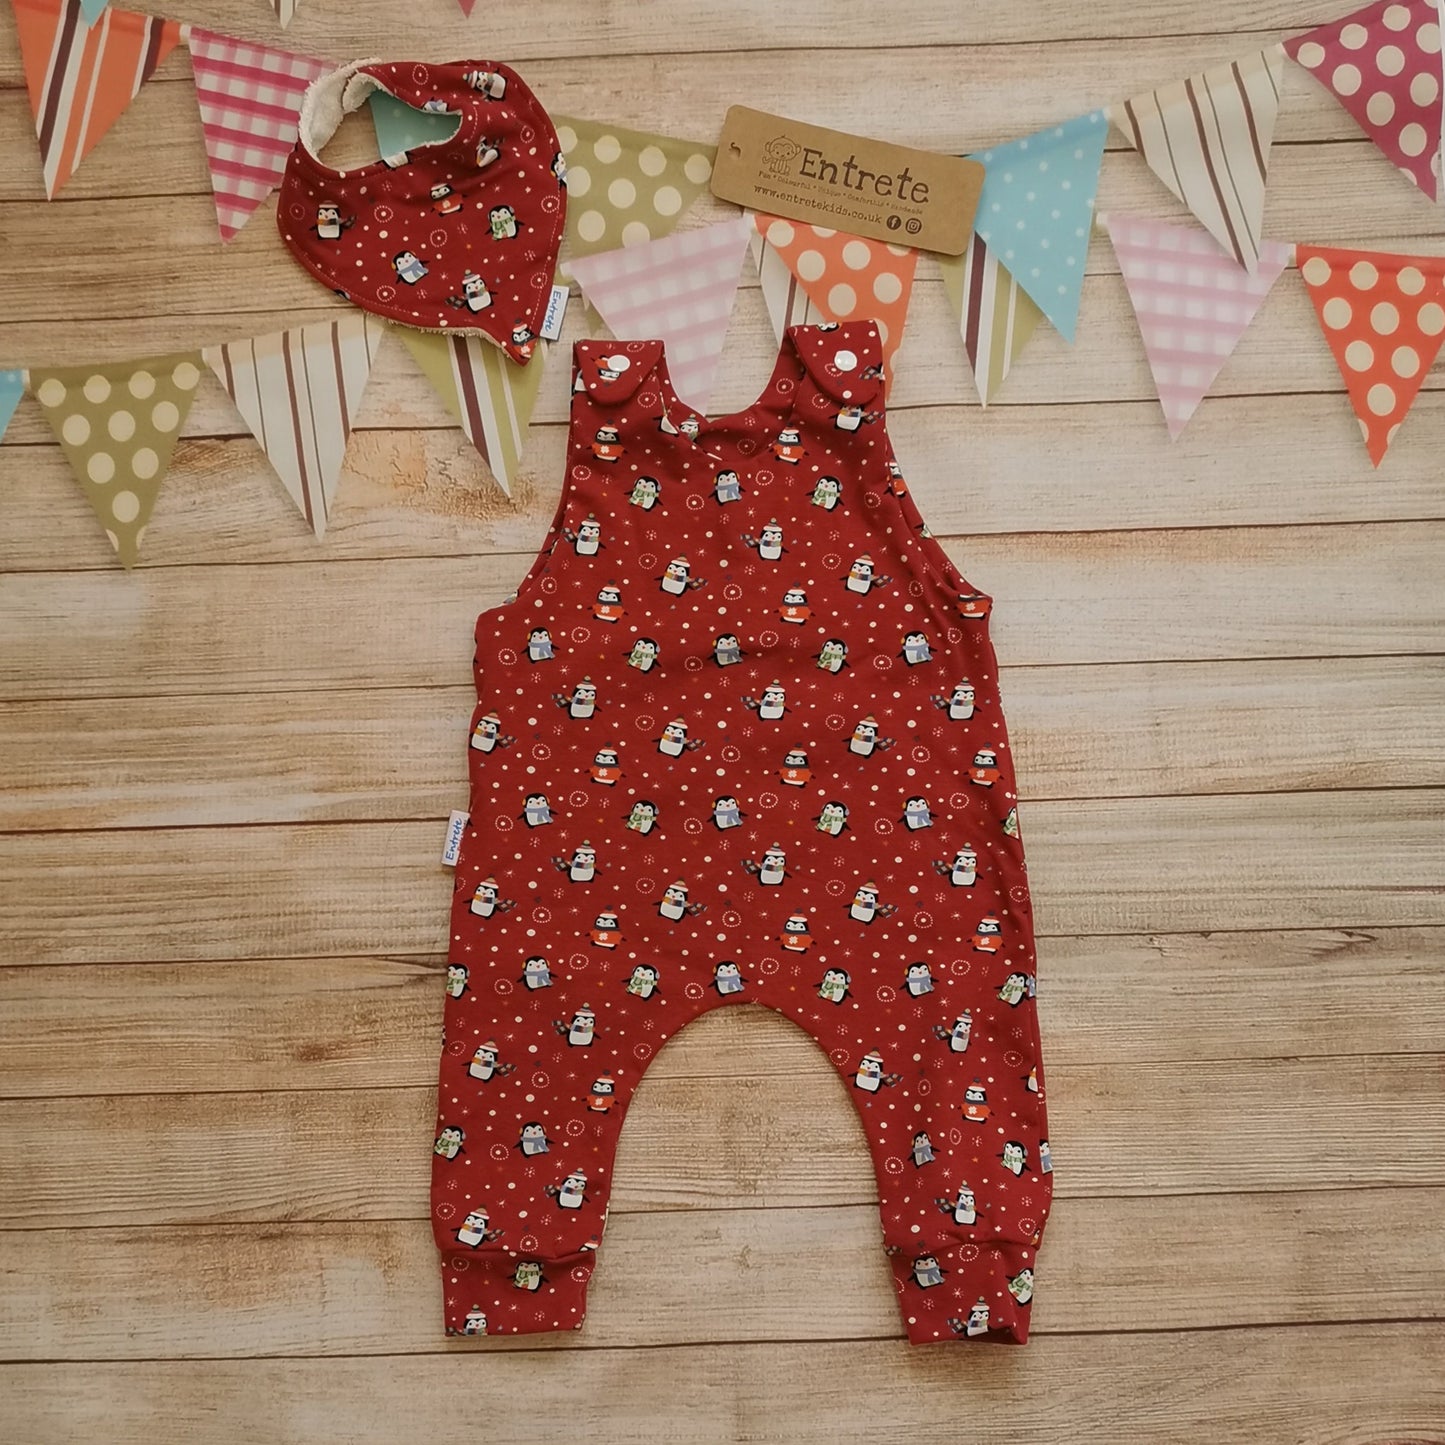 Soft and comfy sleeveless romper, handmade using the festive and fun red penguins cotton jersey. Perfect for Christmas! Shown with a matching bamboo bib. (sold separately)